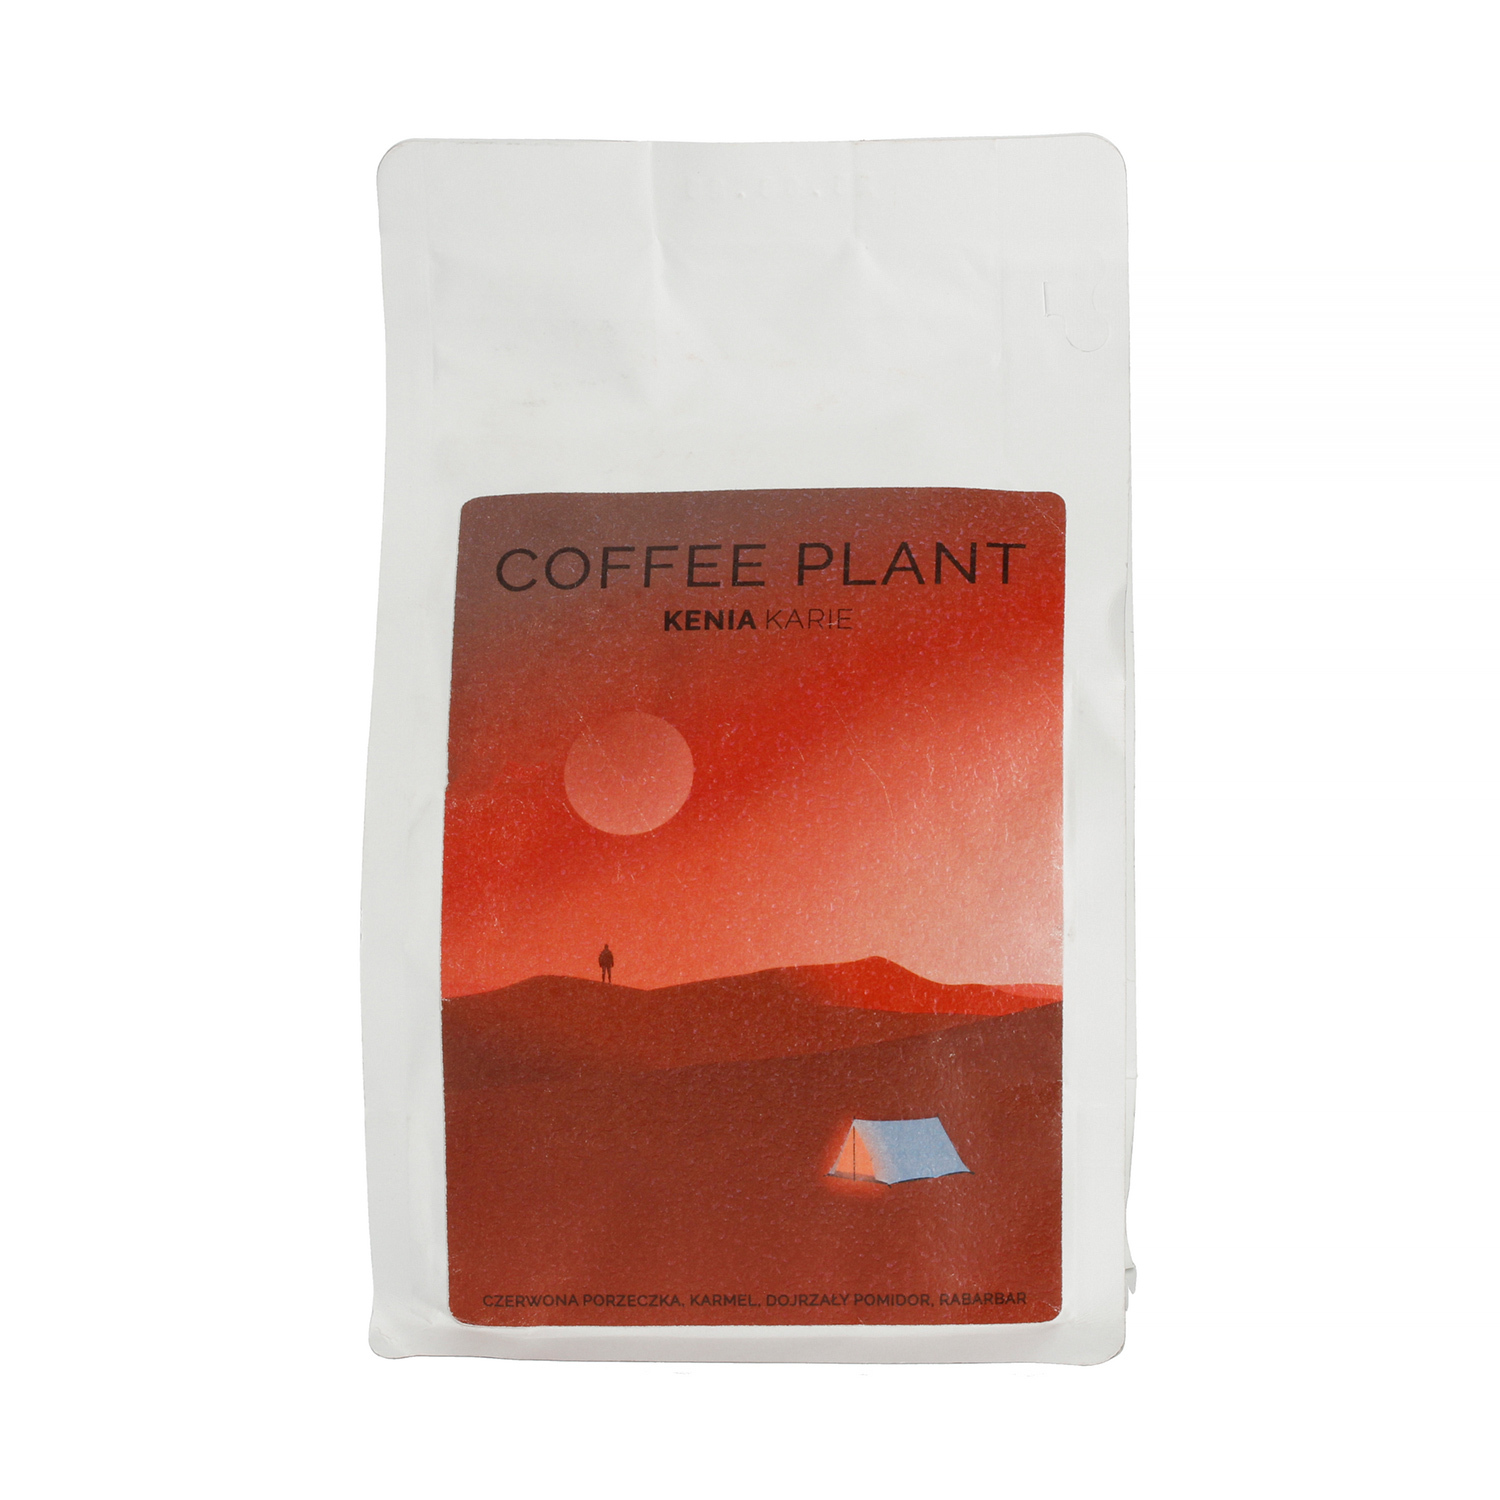 COFFEE PLANT - Kenya Karie Top AA Washed Filter 250g